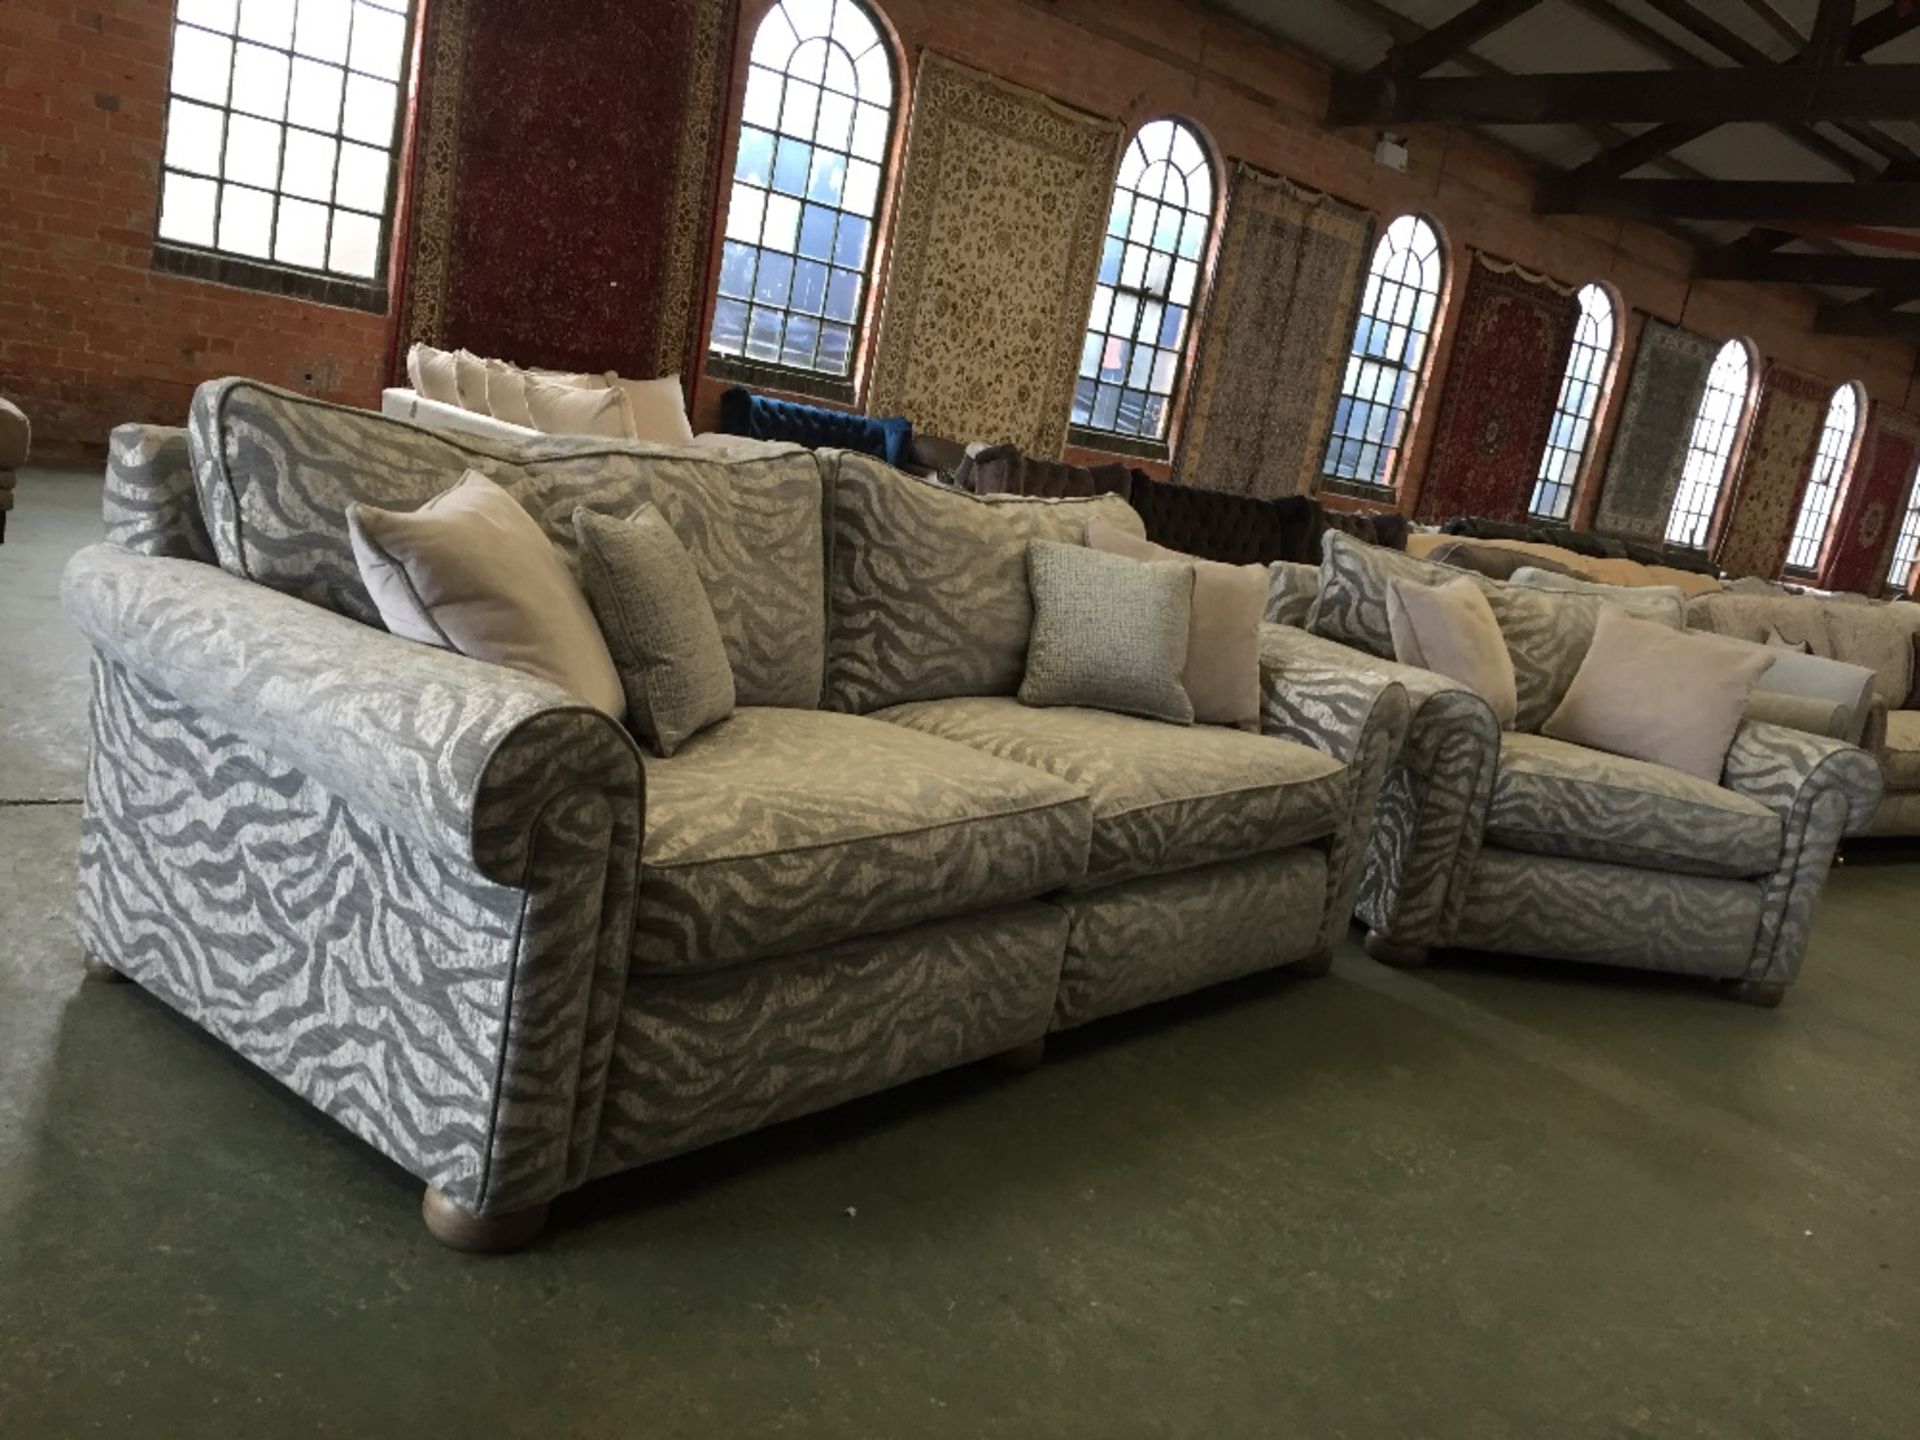 SILVER PATTERNED SPLIT 3 SEATER SOFA AND SNUG CHAI